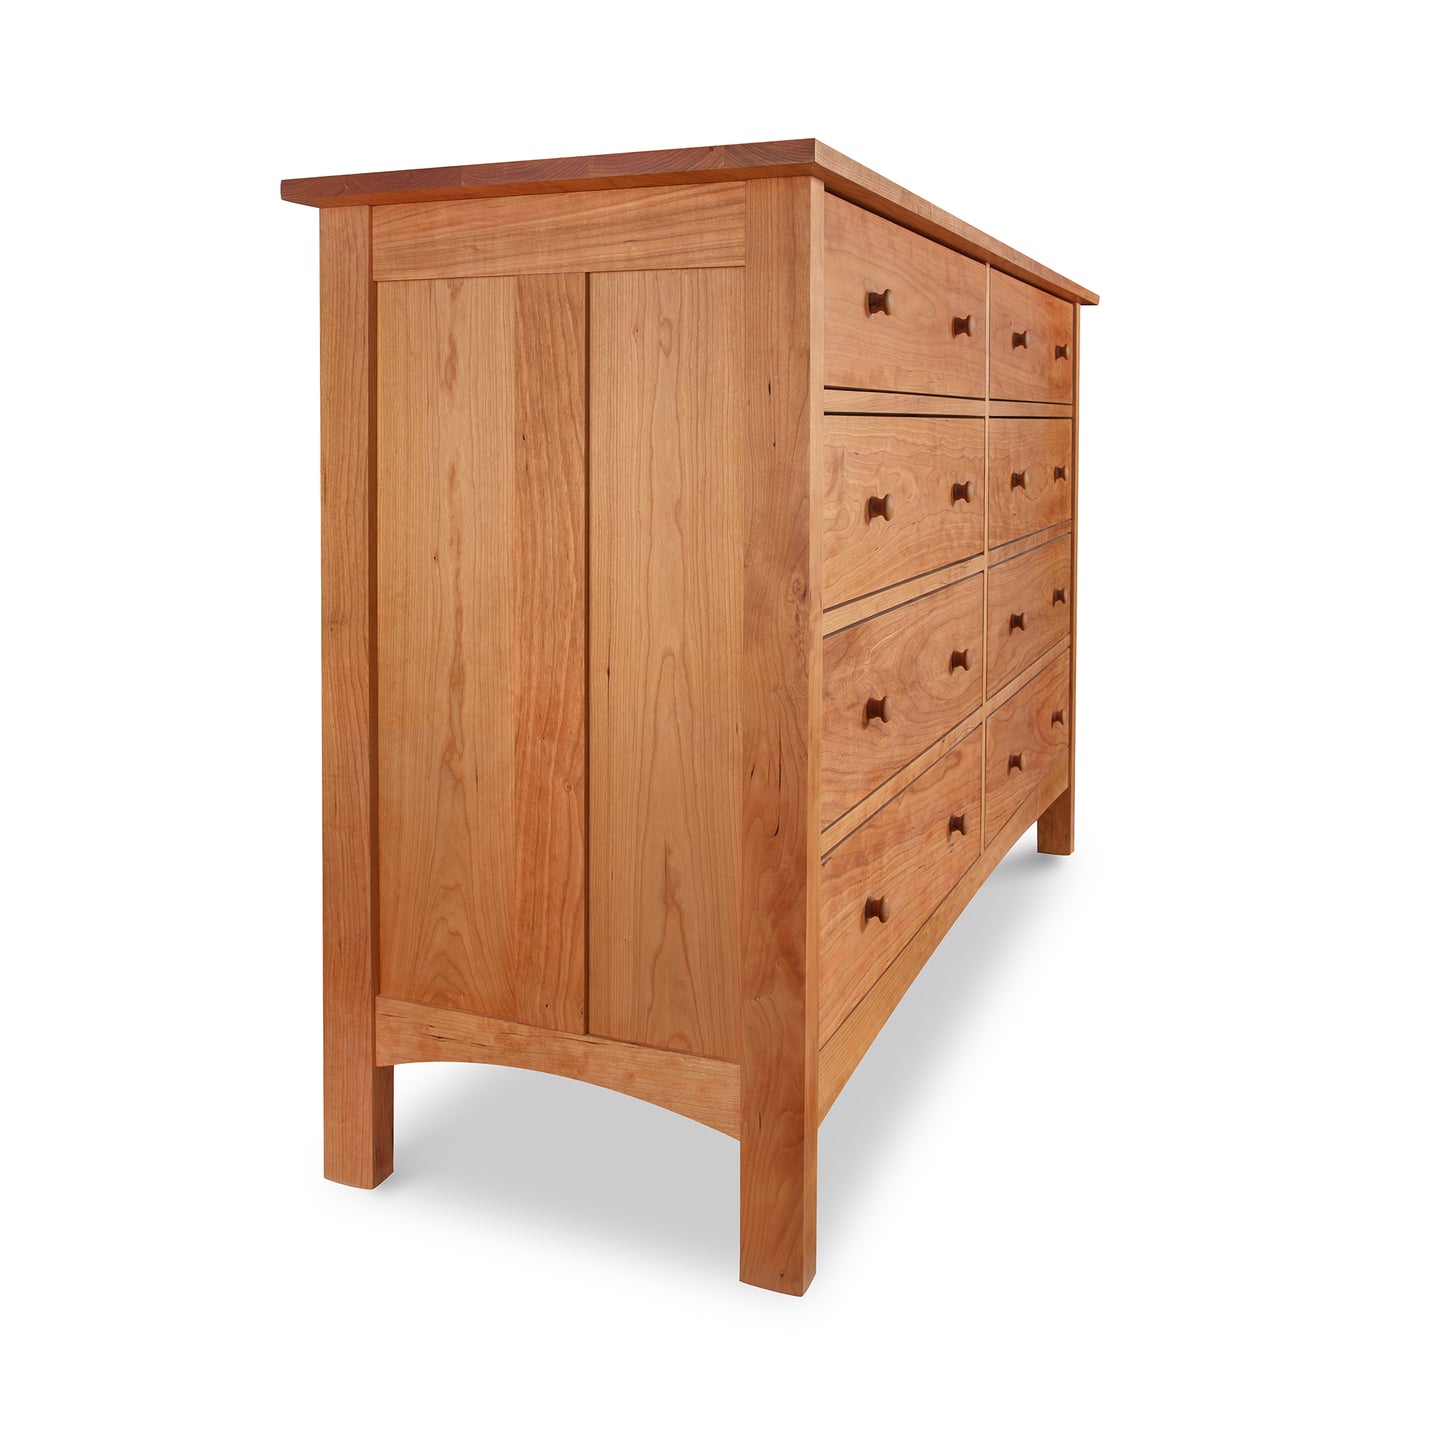 A Burlington Shaker 8-Drawer Dresser #1 by Vermont Furniture Designs with drawers on a white background in Vermont.